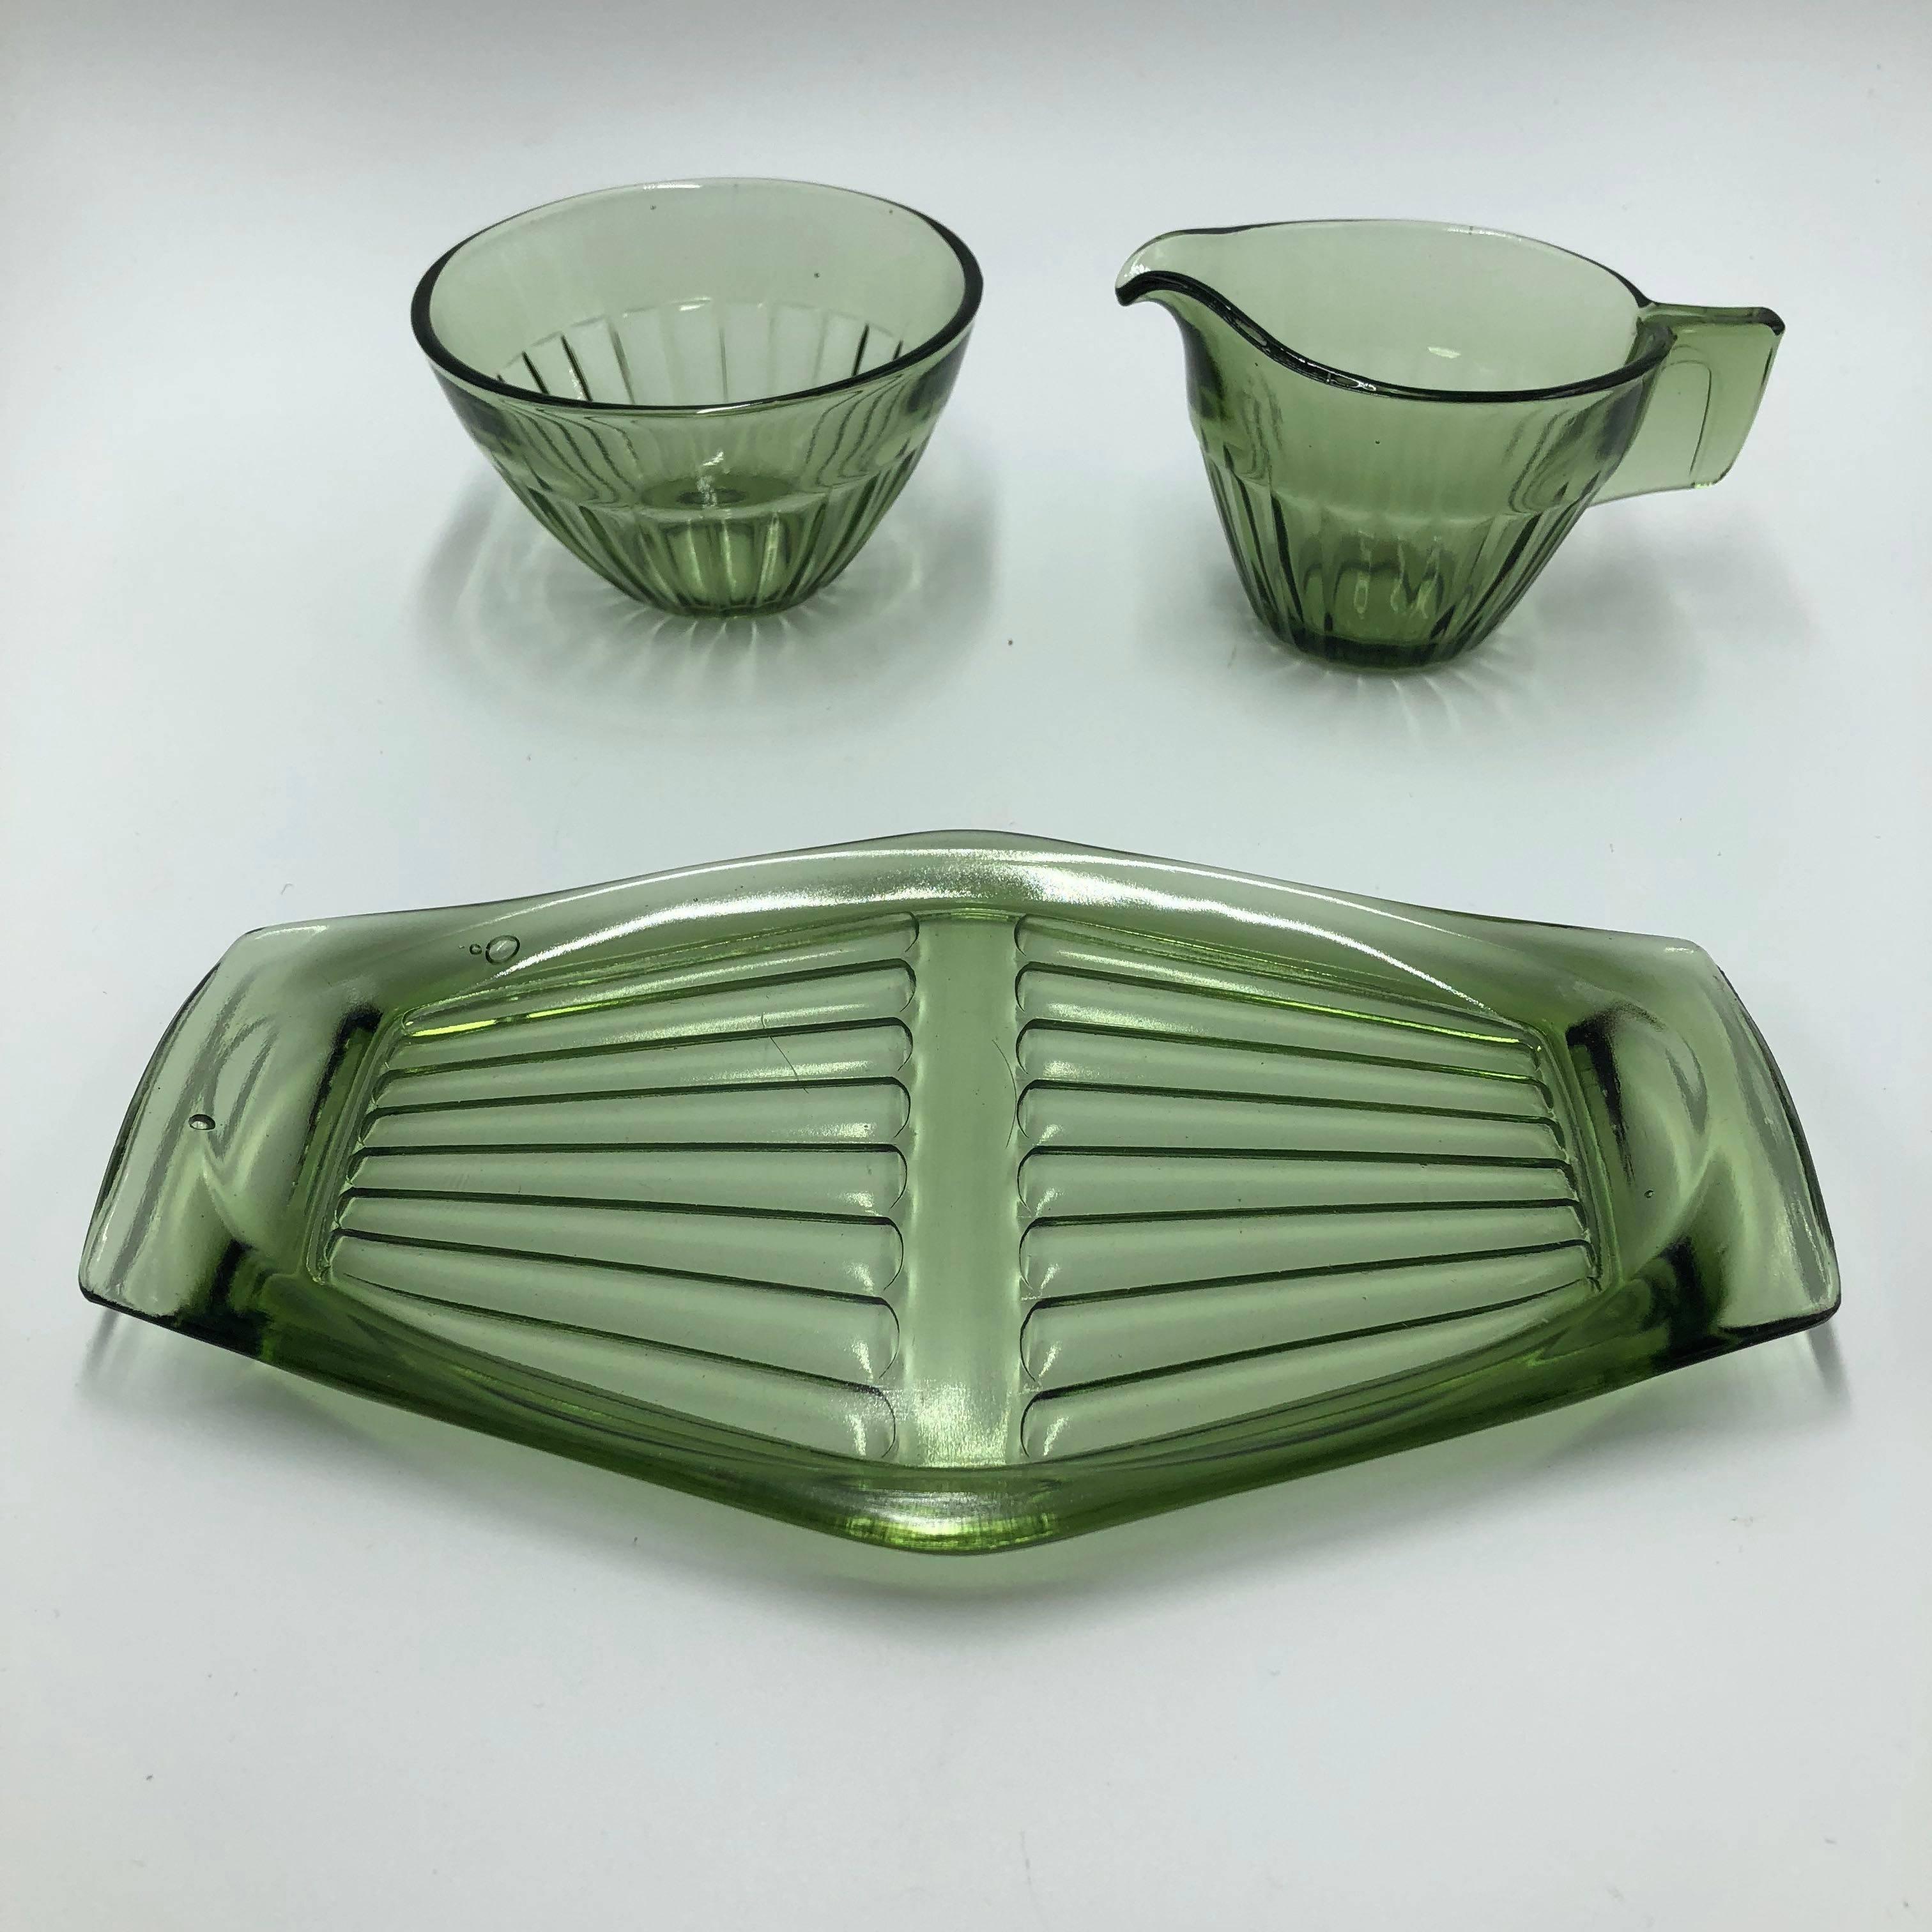 Mid-20th Century Cream and Sugar Set in Silvergreen by Copier Leerdam, 1930s For Sale